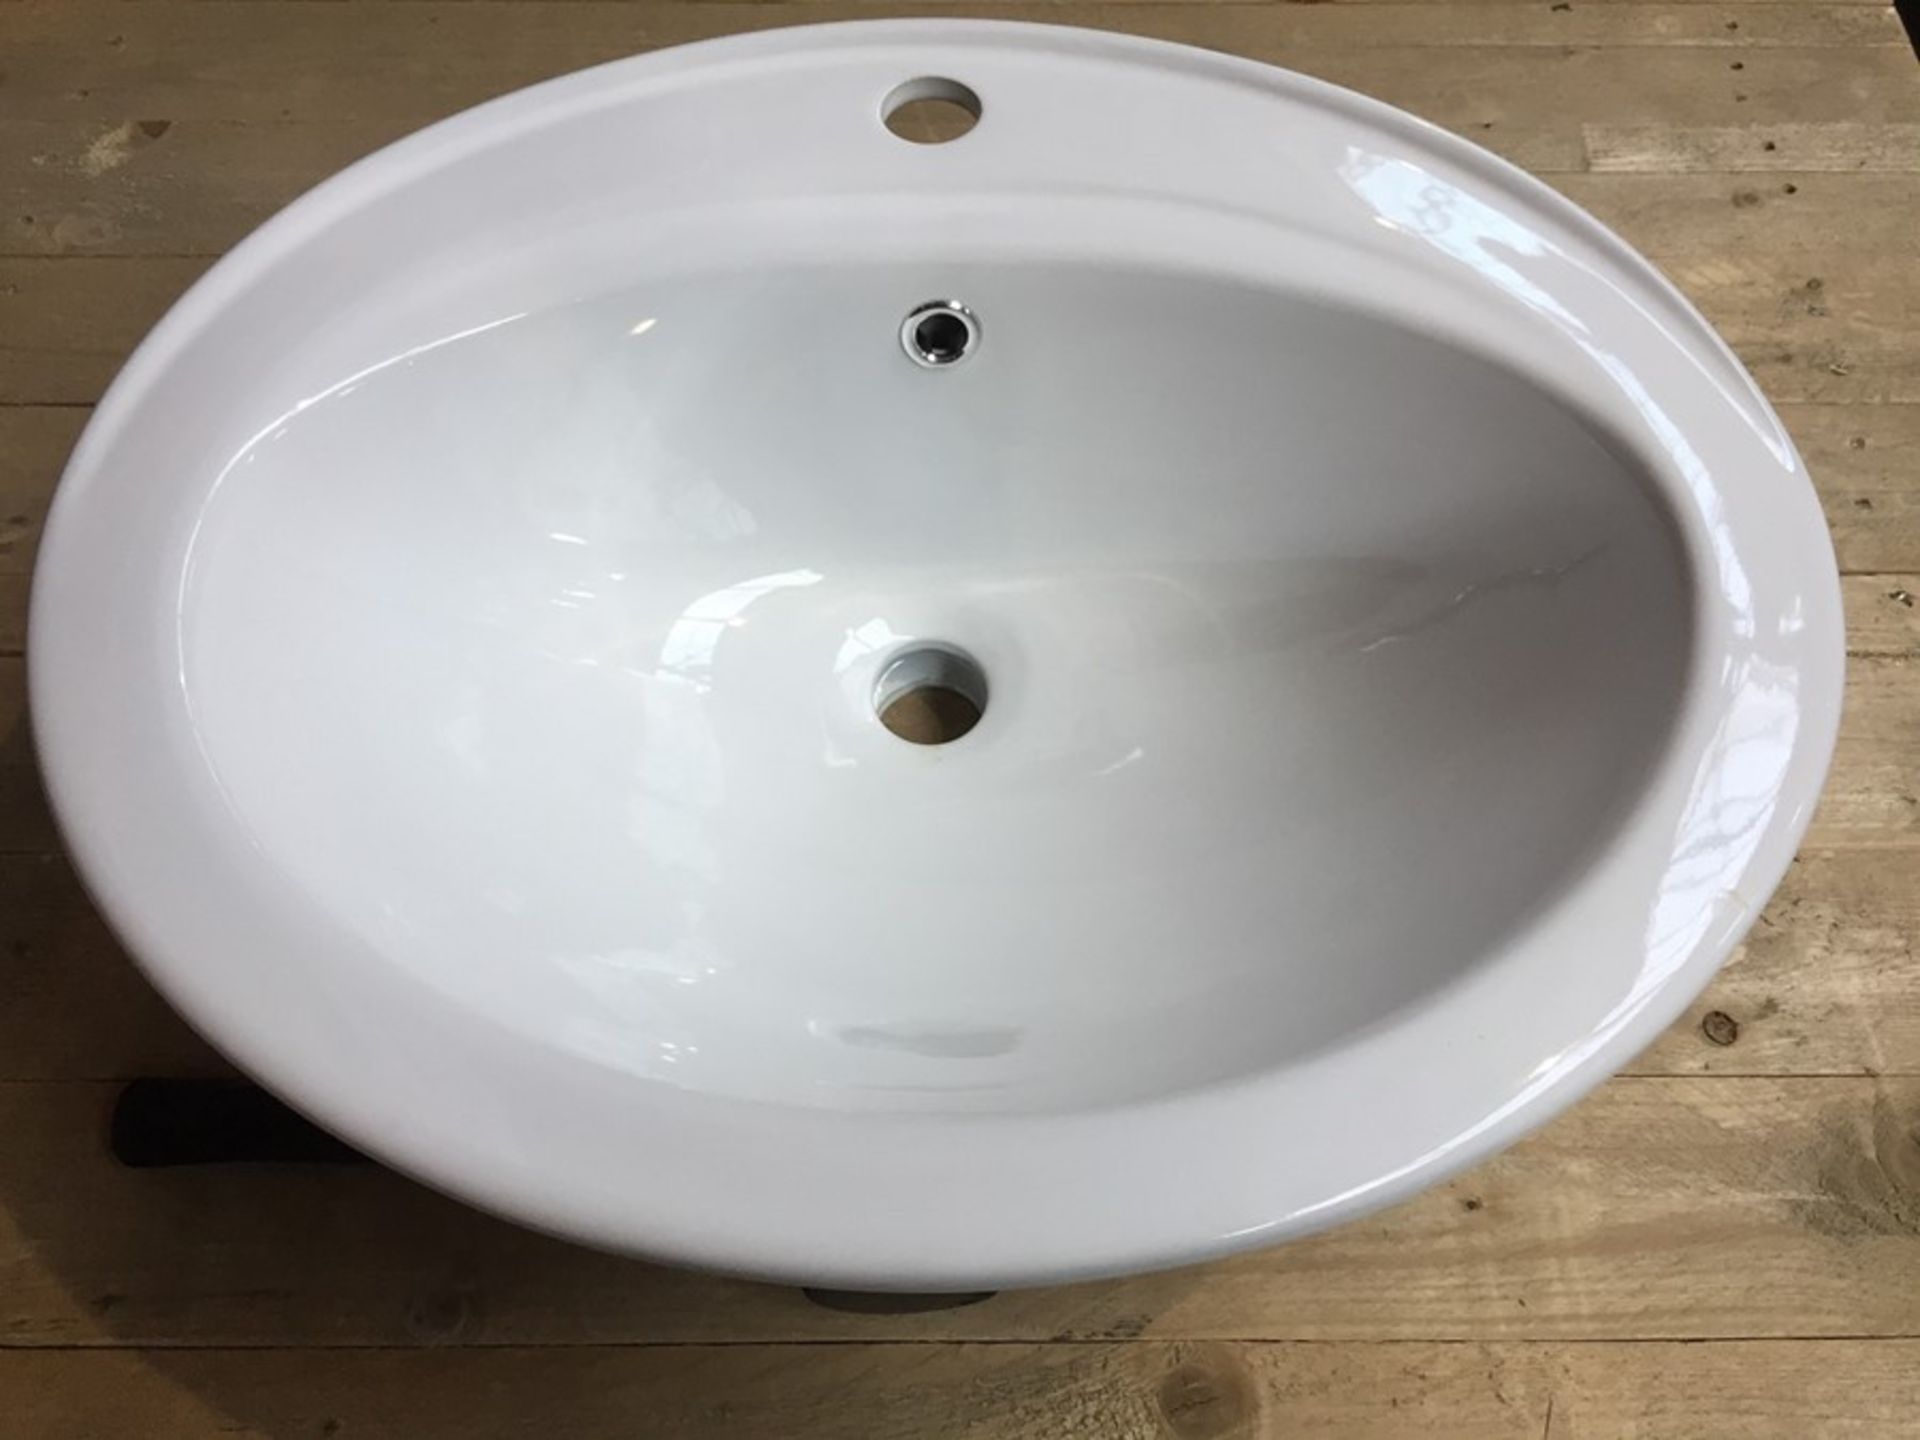 1 AS NEW BOXED OVAL INSET CERAMIC BASIN ONE TAP HOLE RRP £129.00 - C825.1